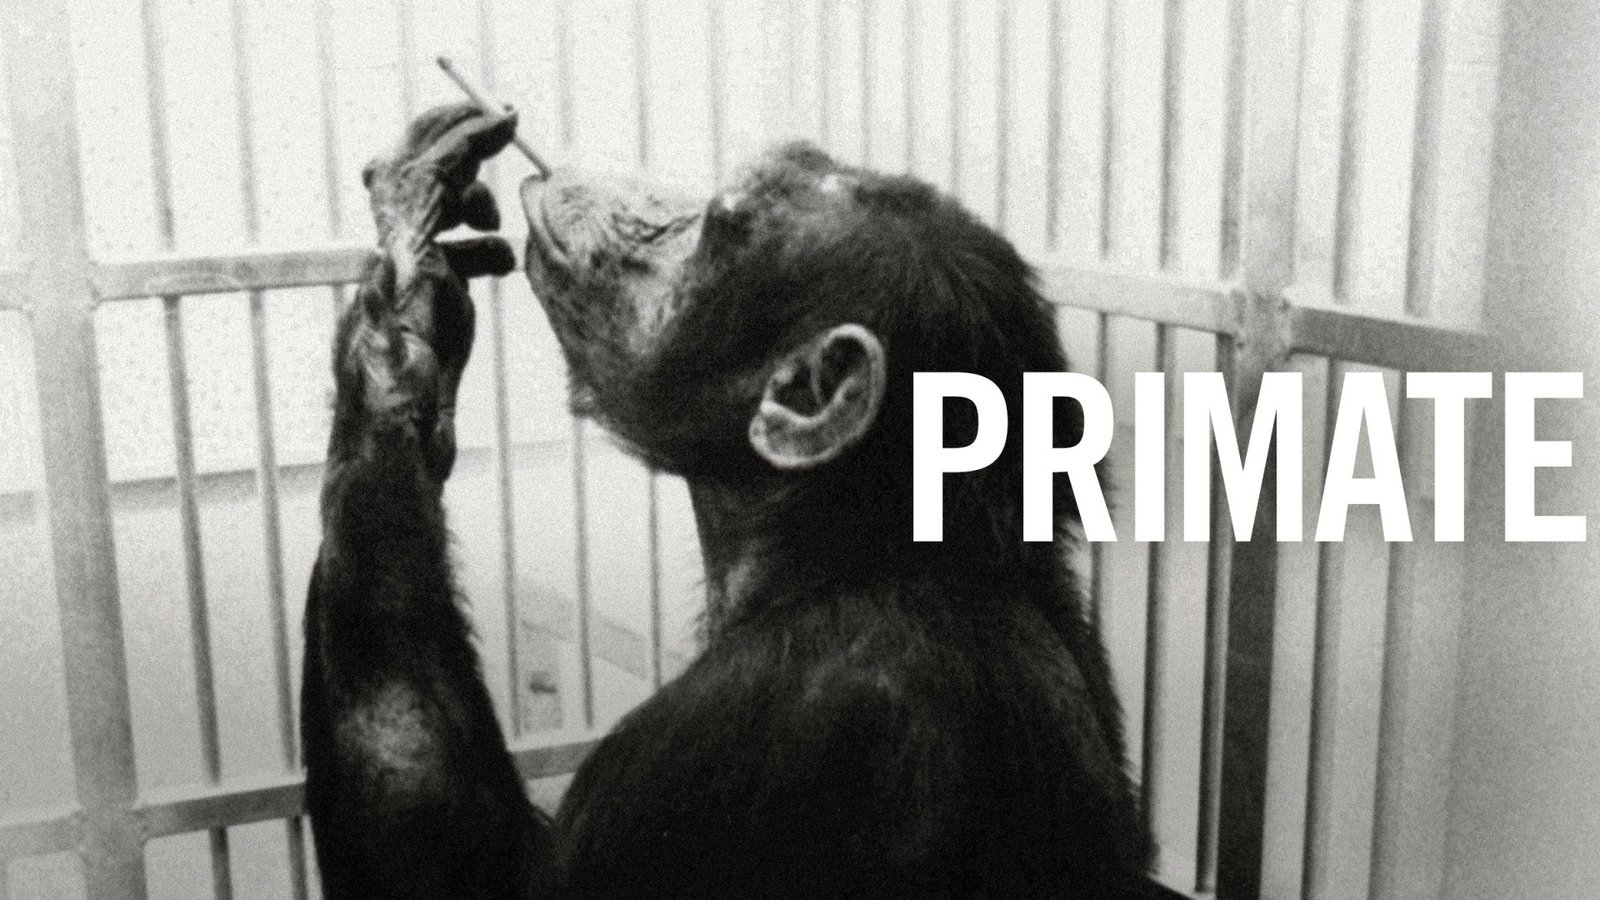 Primate - The Daily Activities of a Primate Research Center